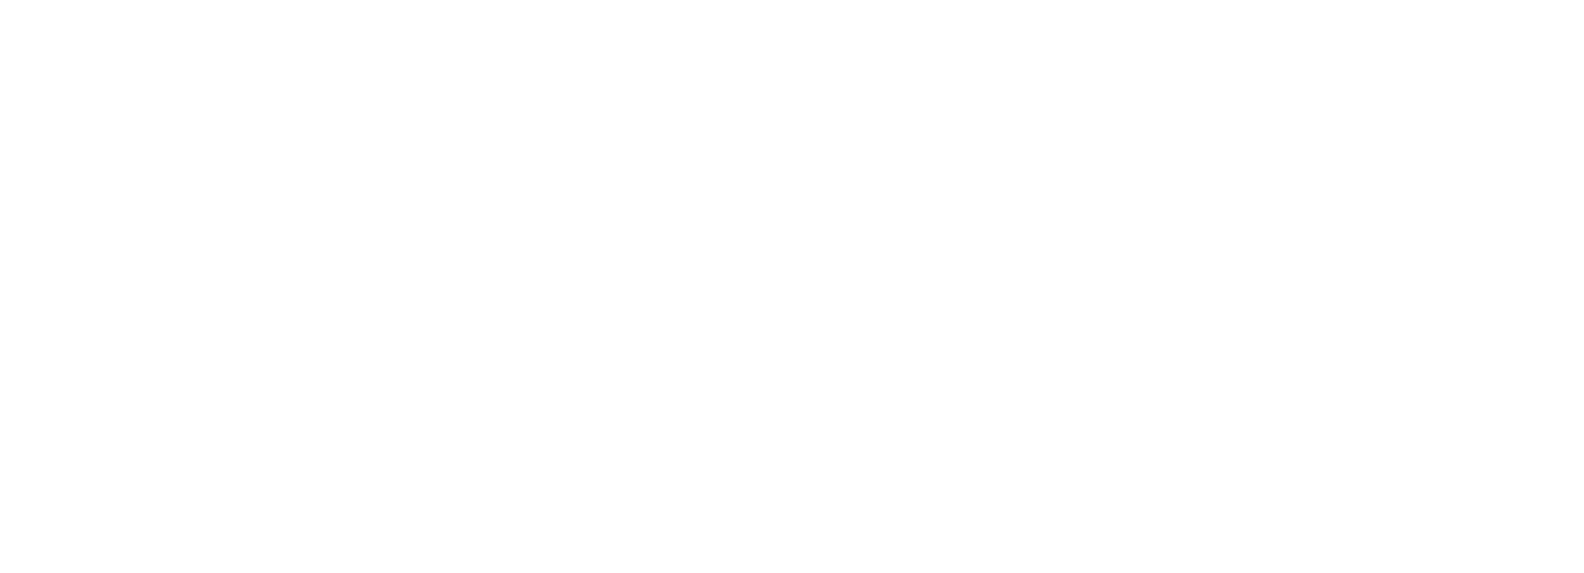 ACWA POWER Company logo large for dark backgrounds (transparent PNG)